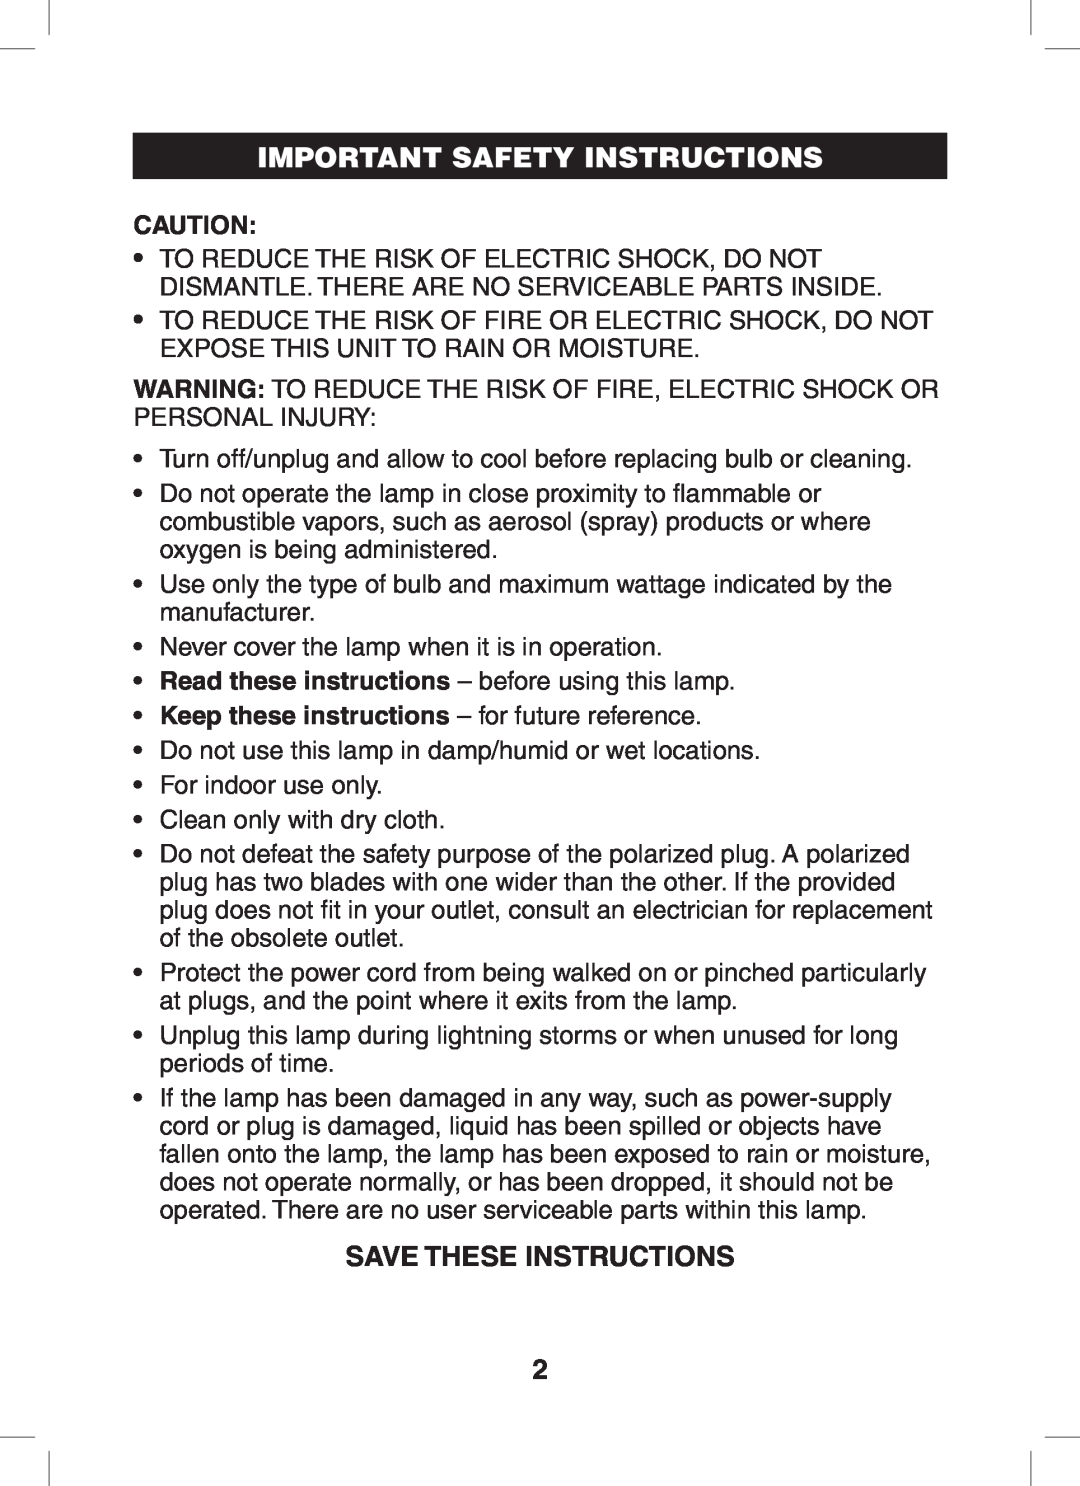 Verilux PL05 manual Important Safety Instructions, Save These Instructions, Keep these instructions - for future reference 